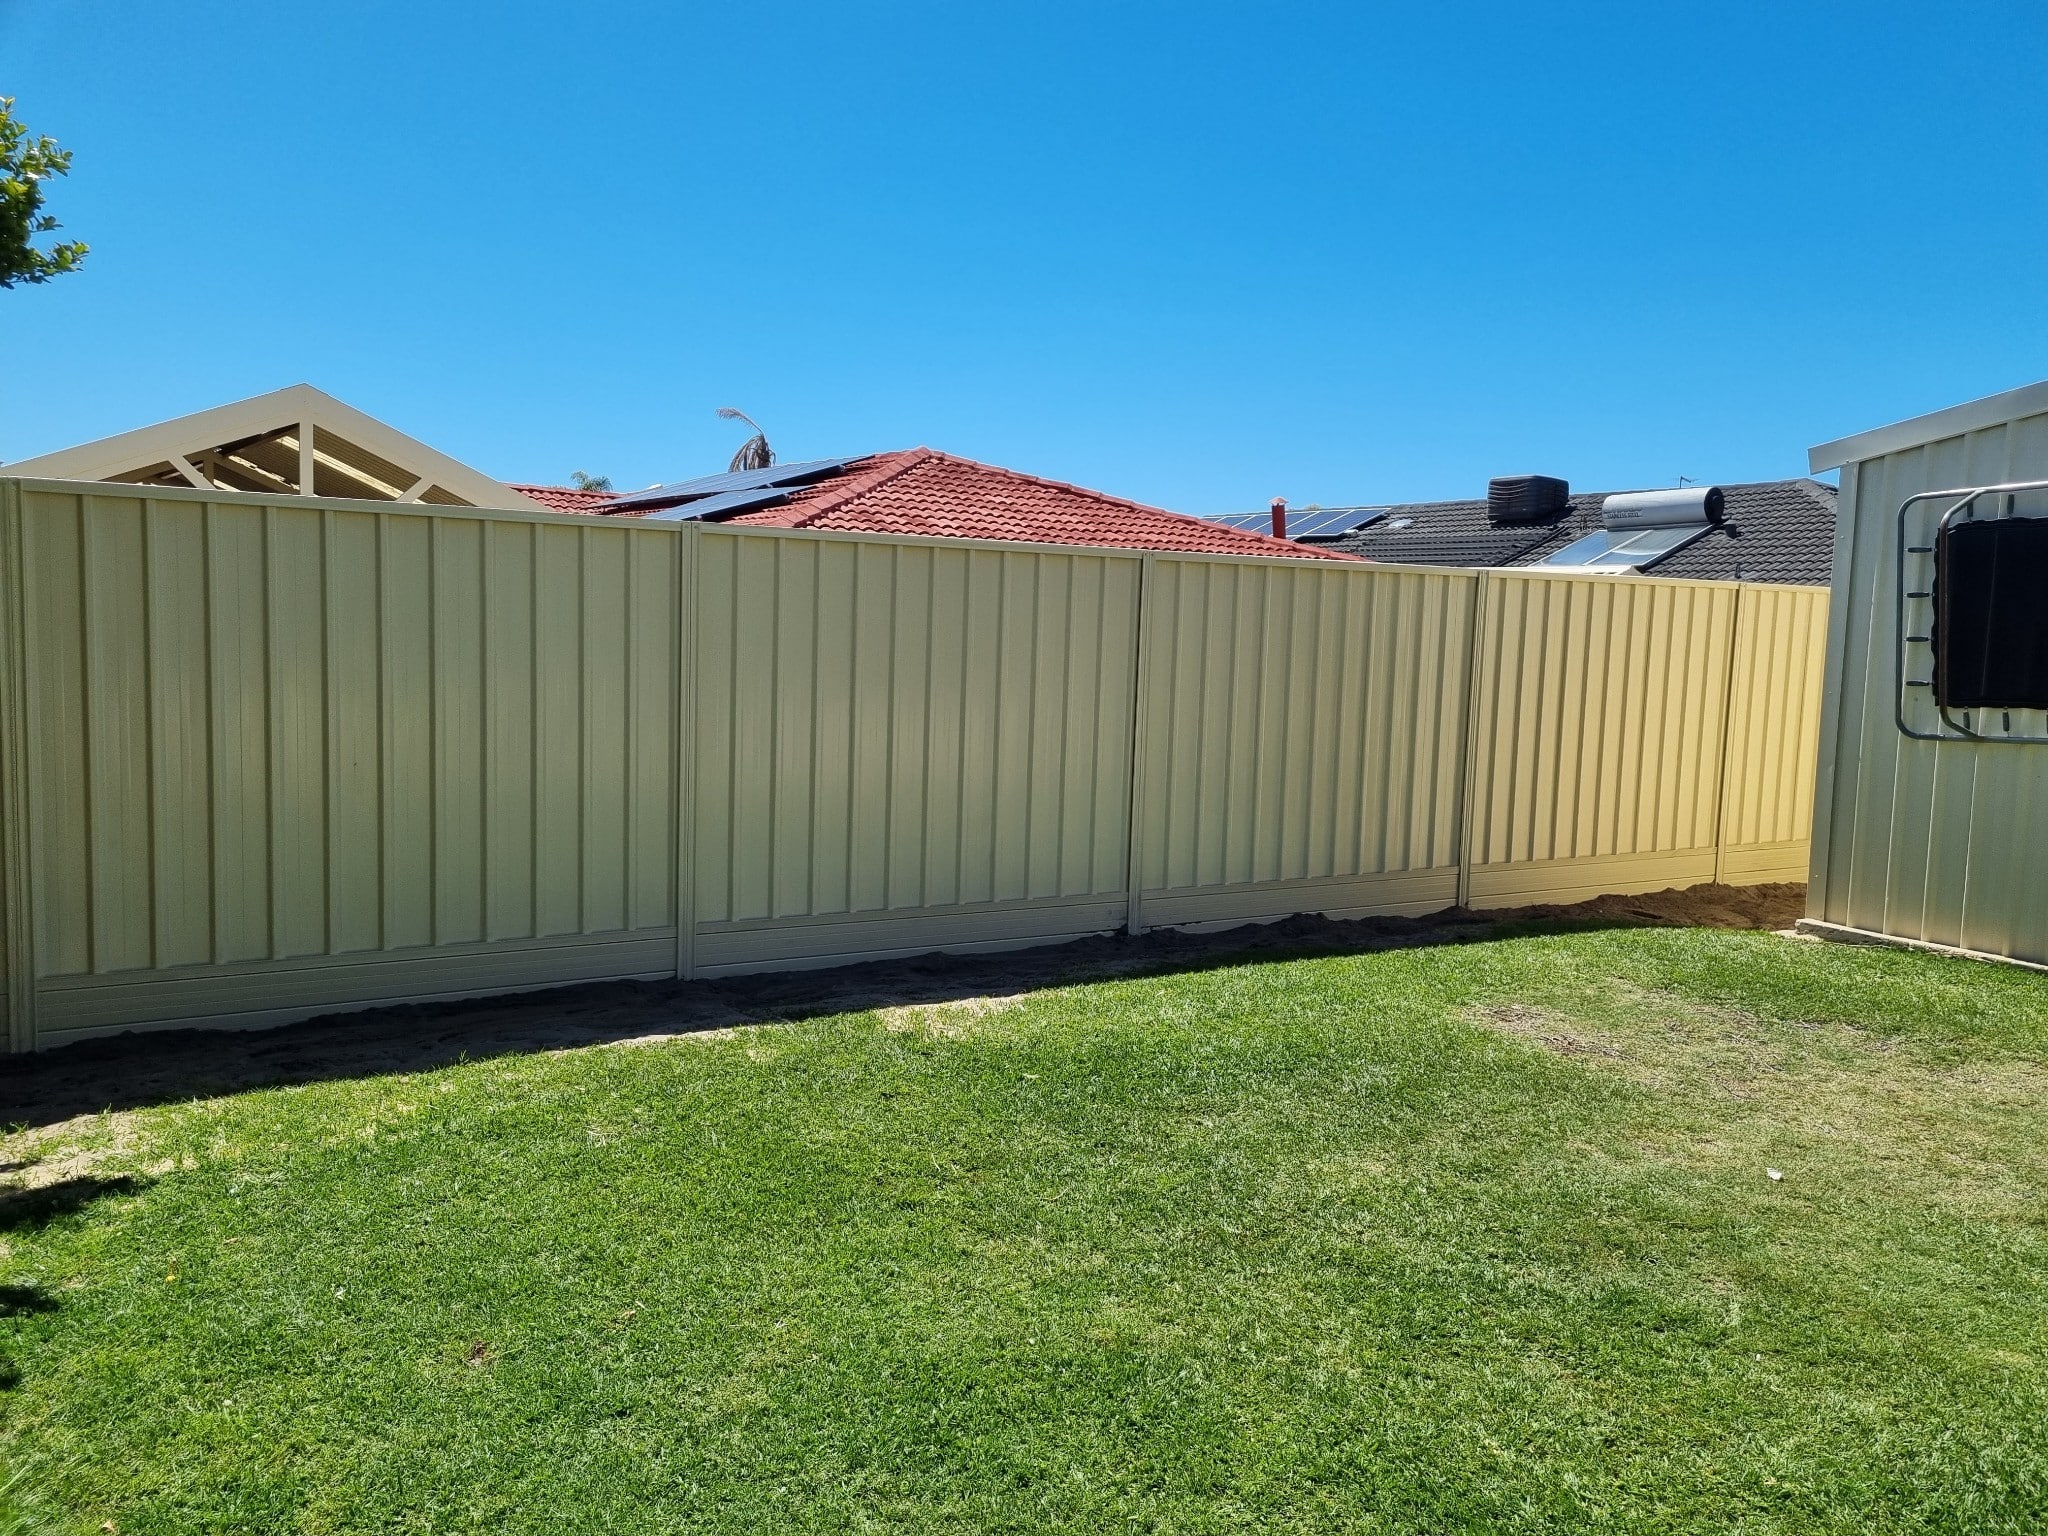 Home Perth Fence Installing at a residential property